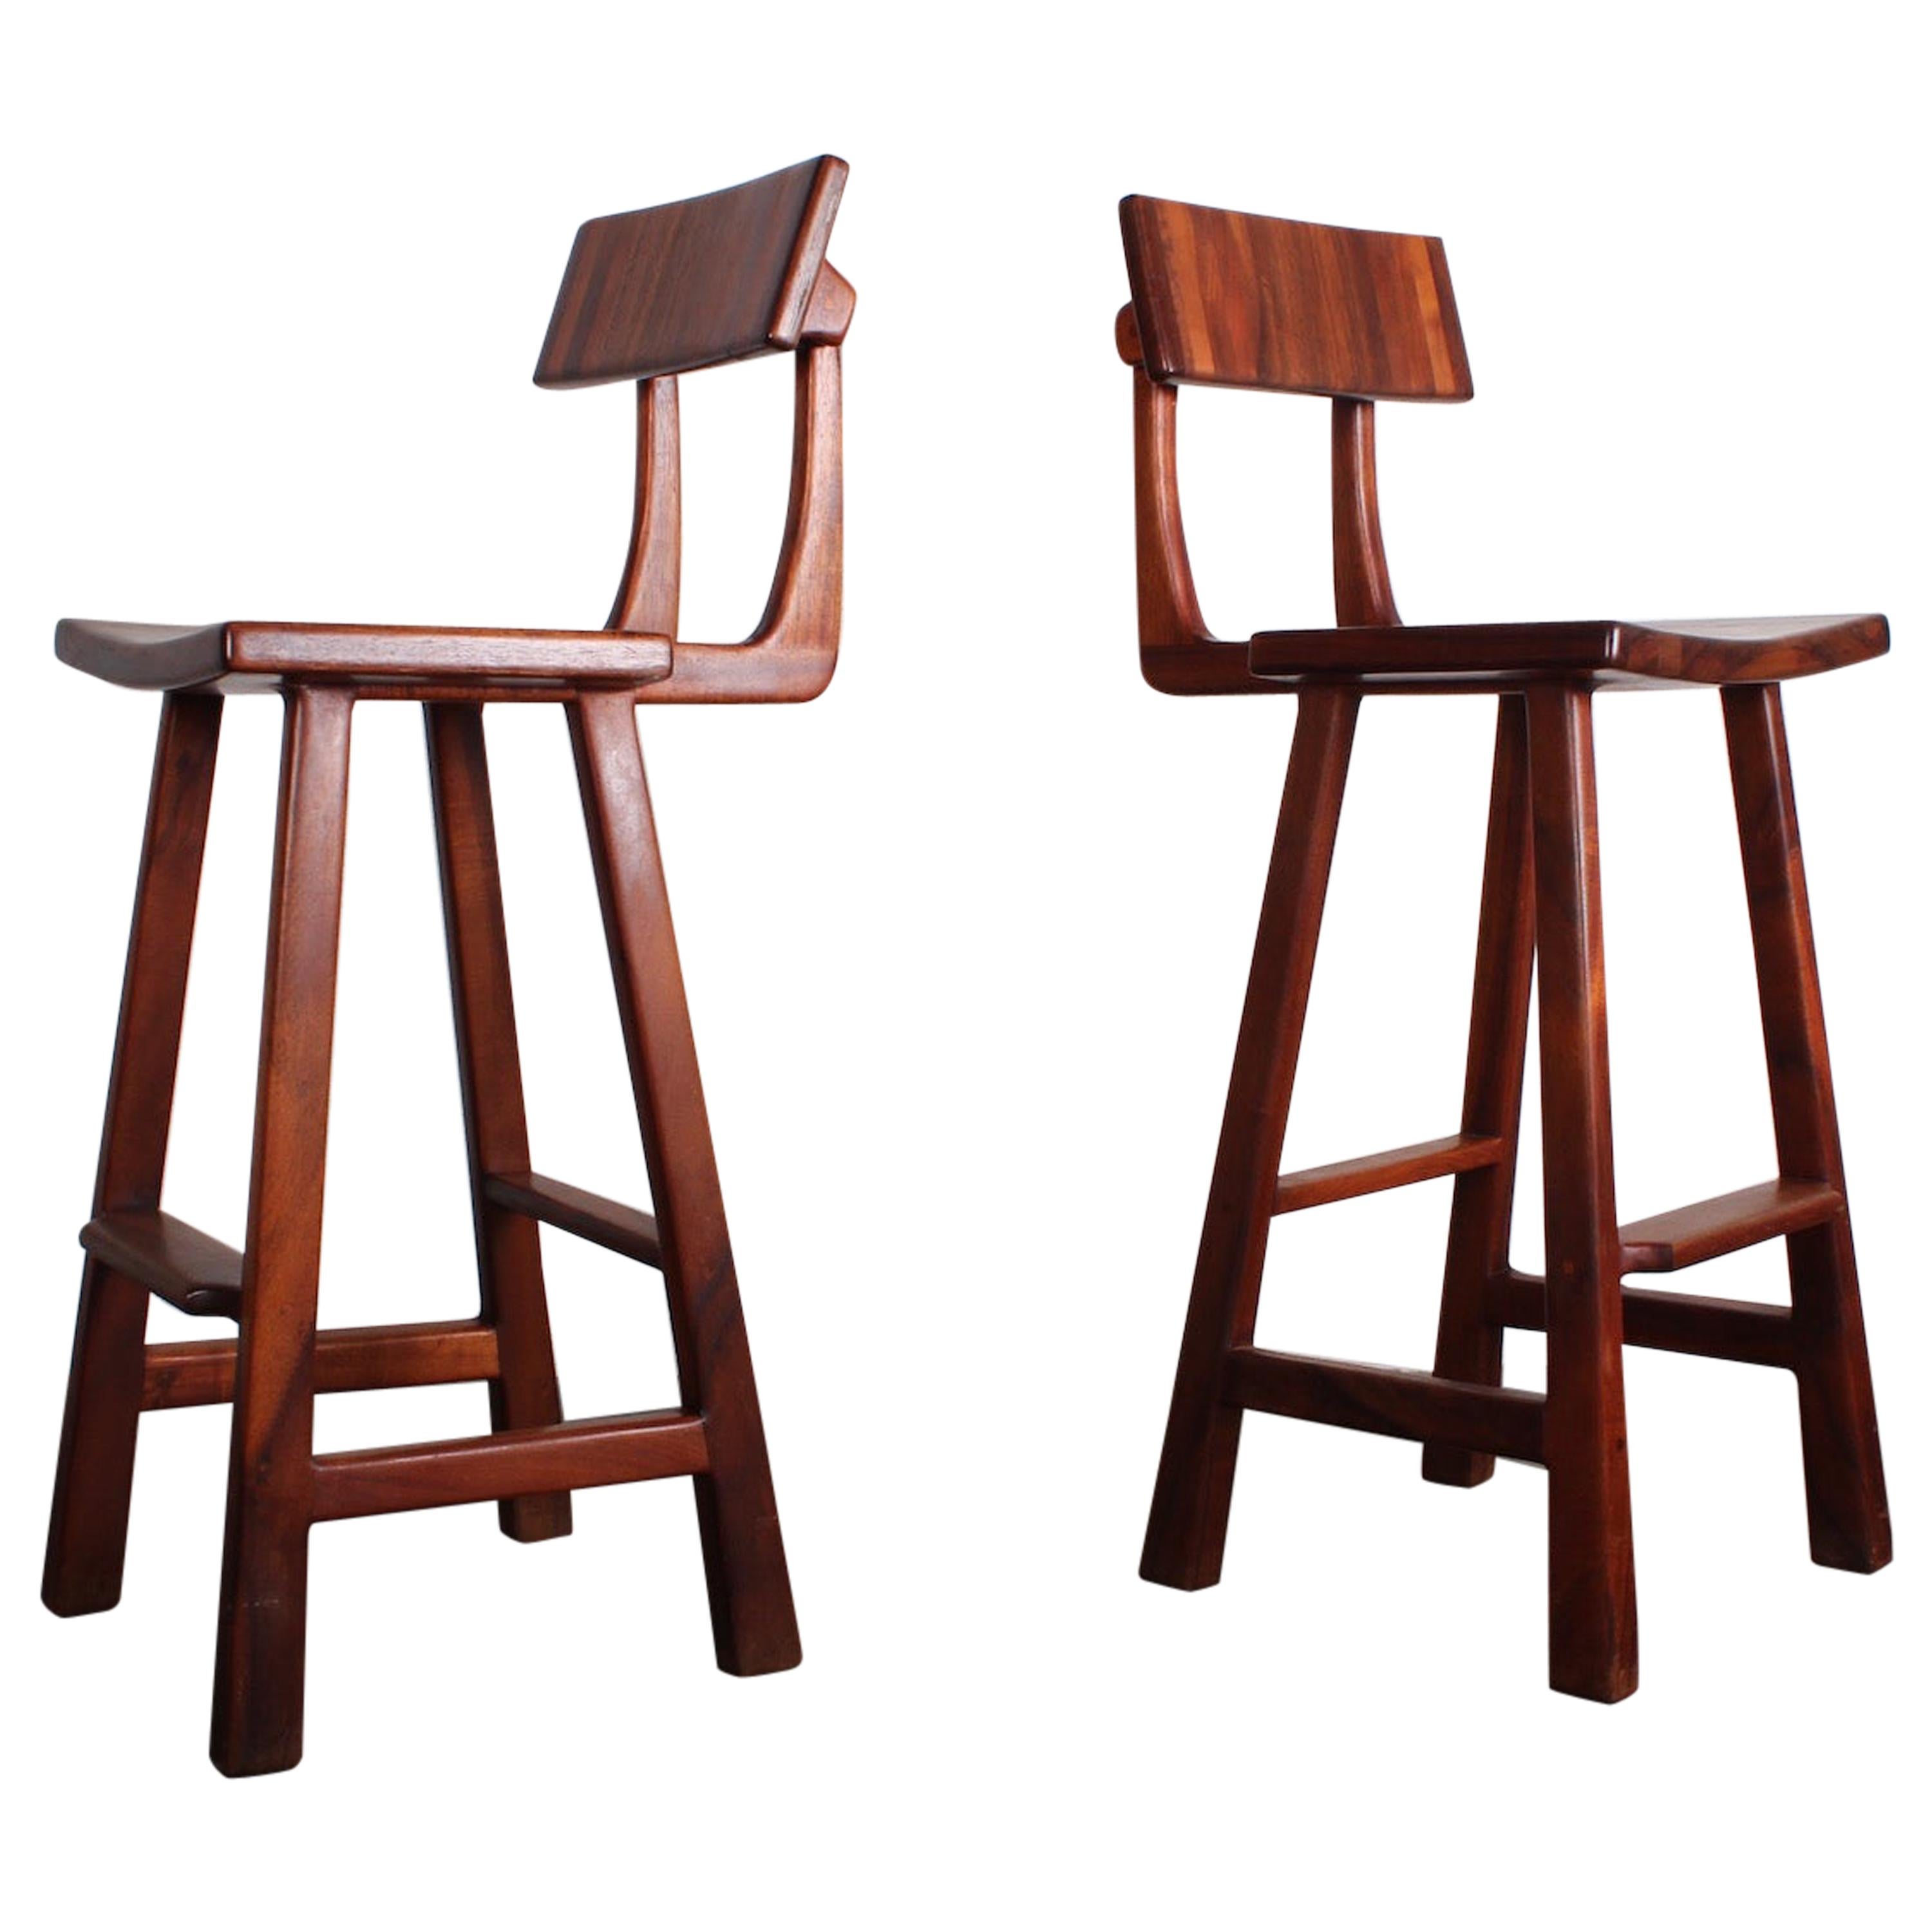 Pair of Studio Craft Barstools by Robert and Joanne Herzog For Sale